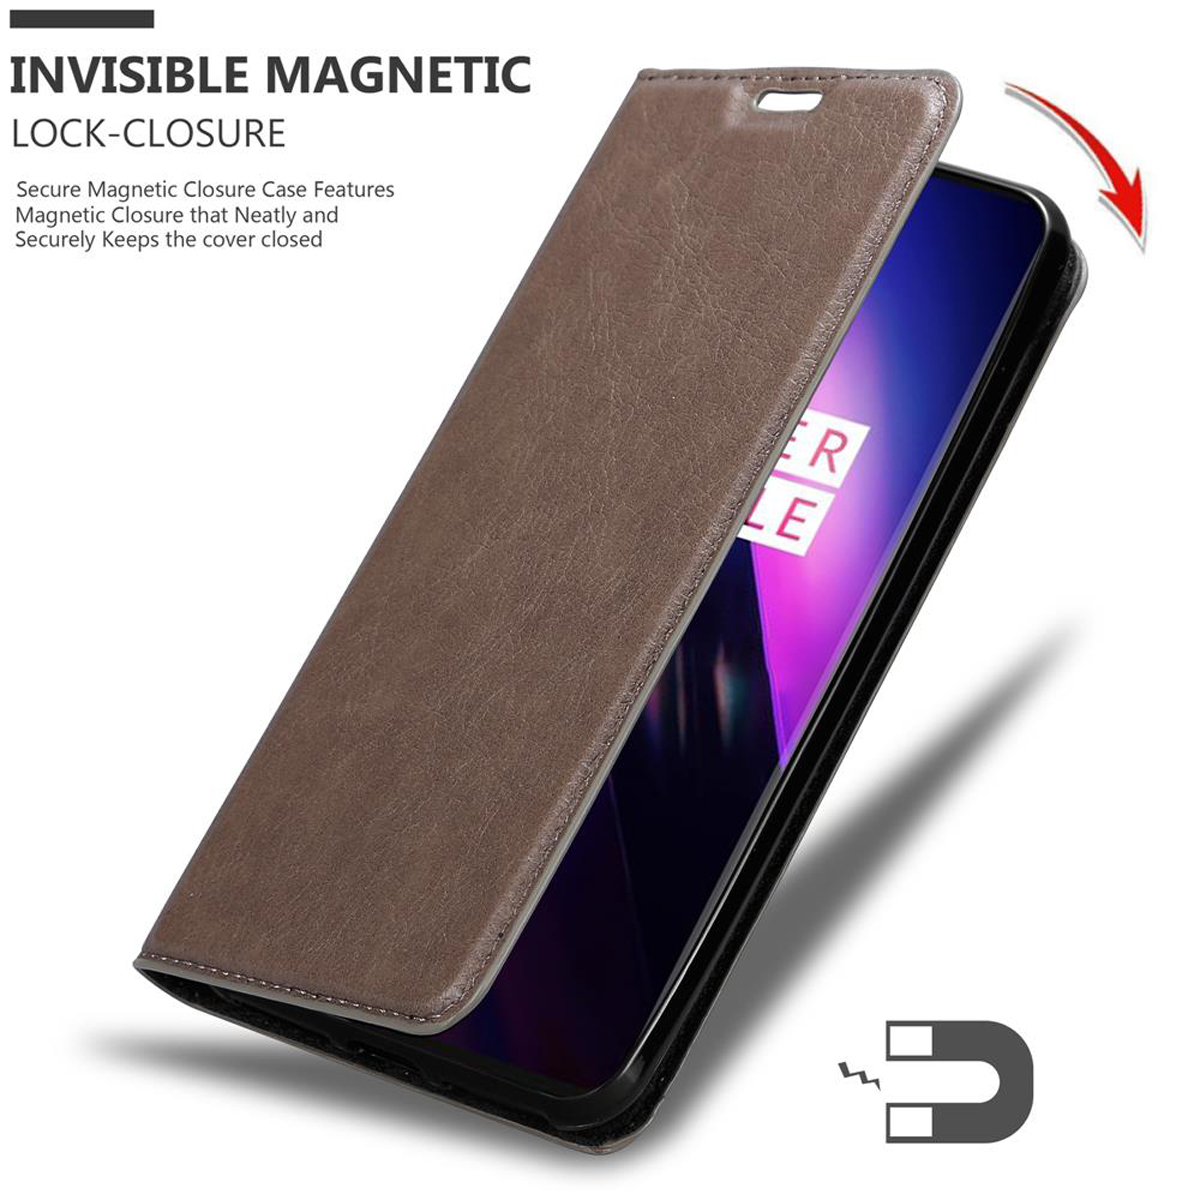 8, Hülle Bookcover, OnePlus, BRAUN Invisible Magnet, CADORABO KAFFEE Book